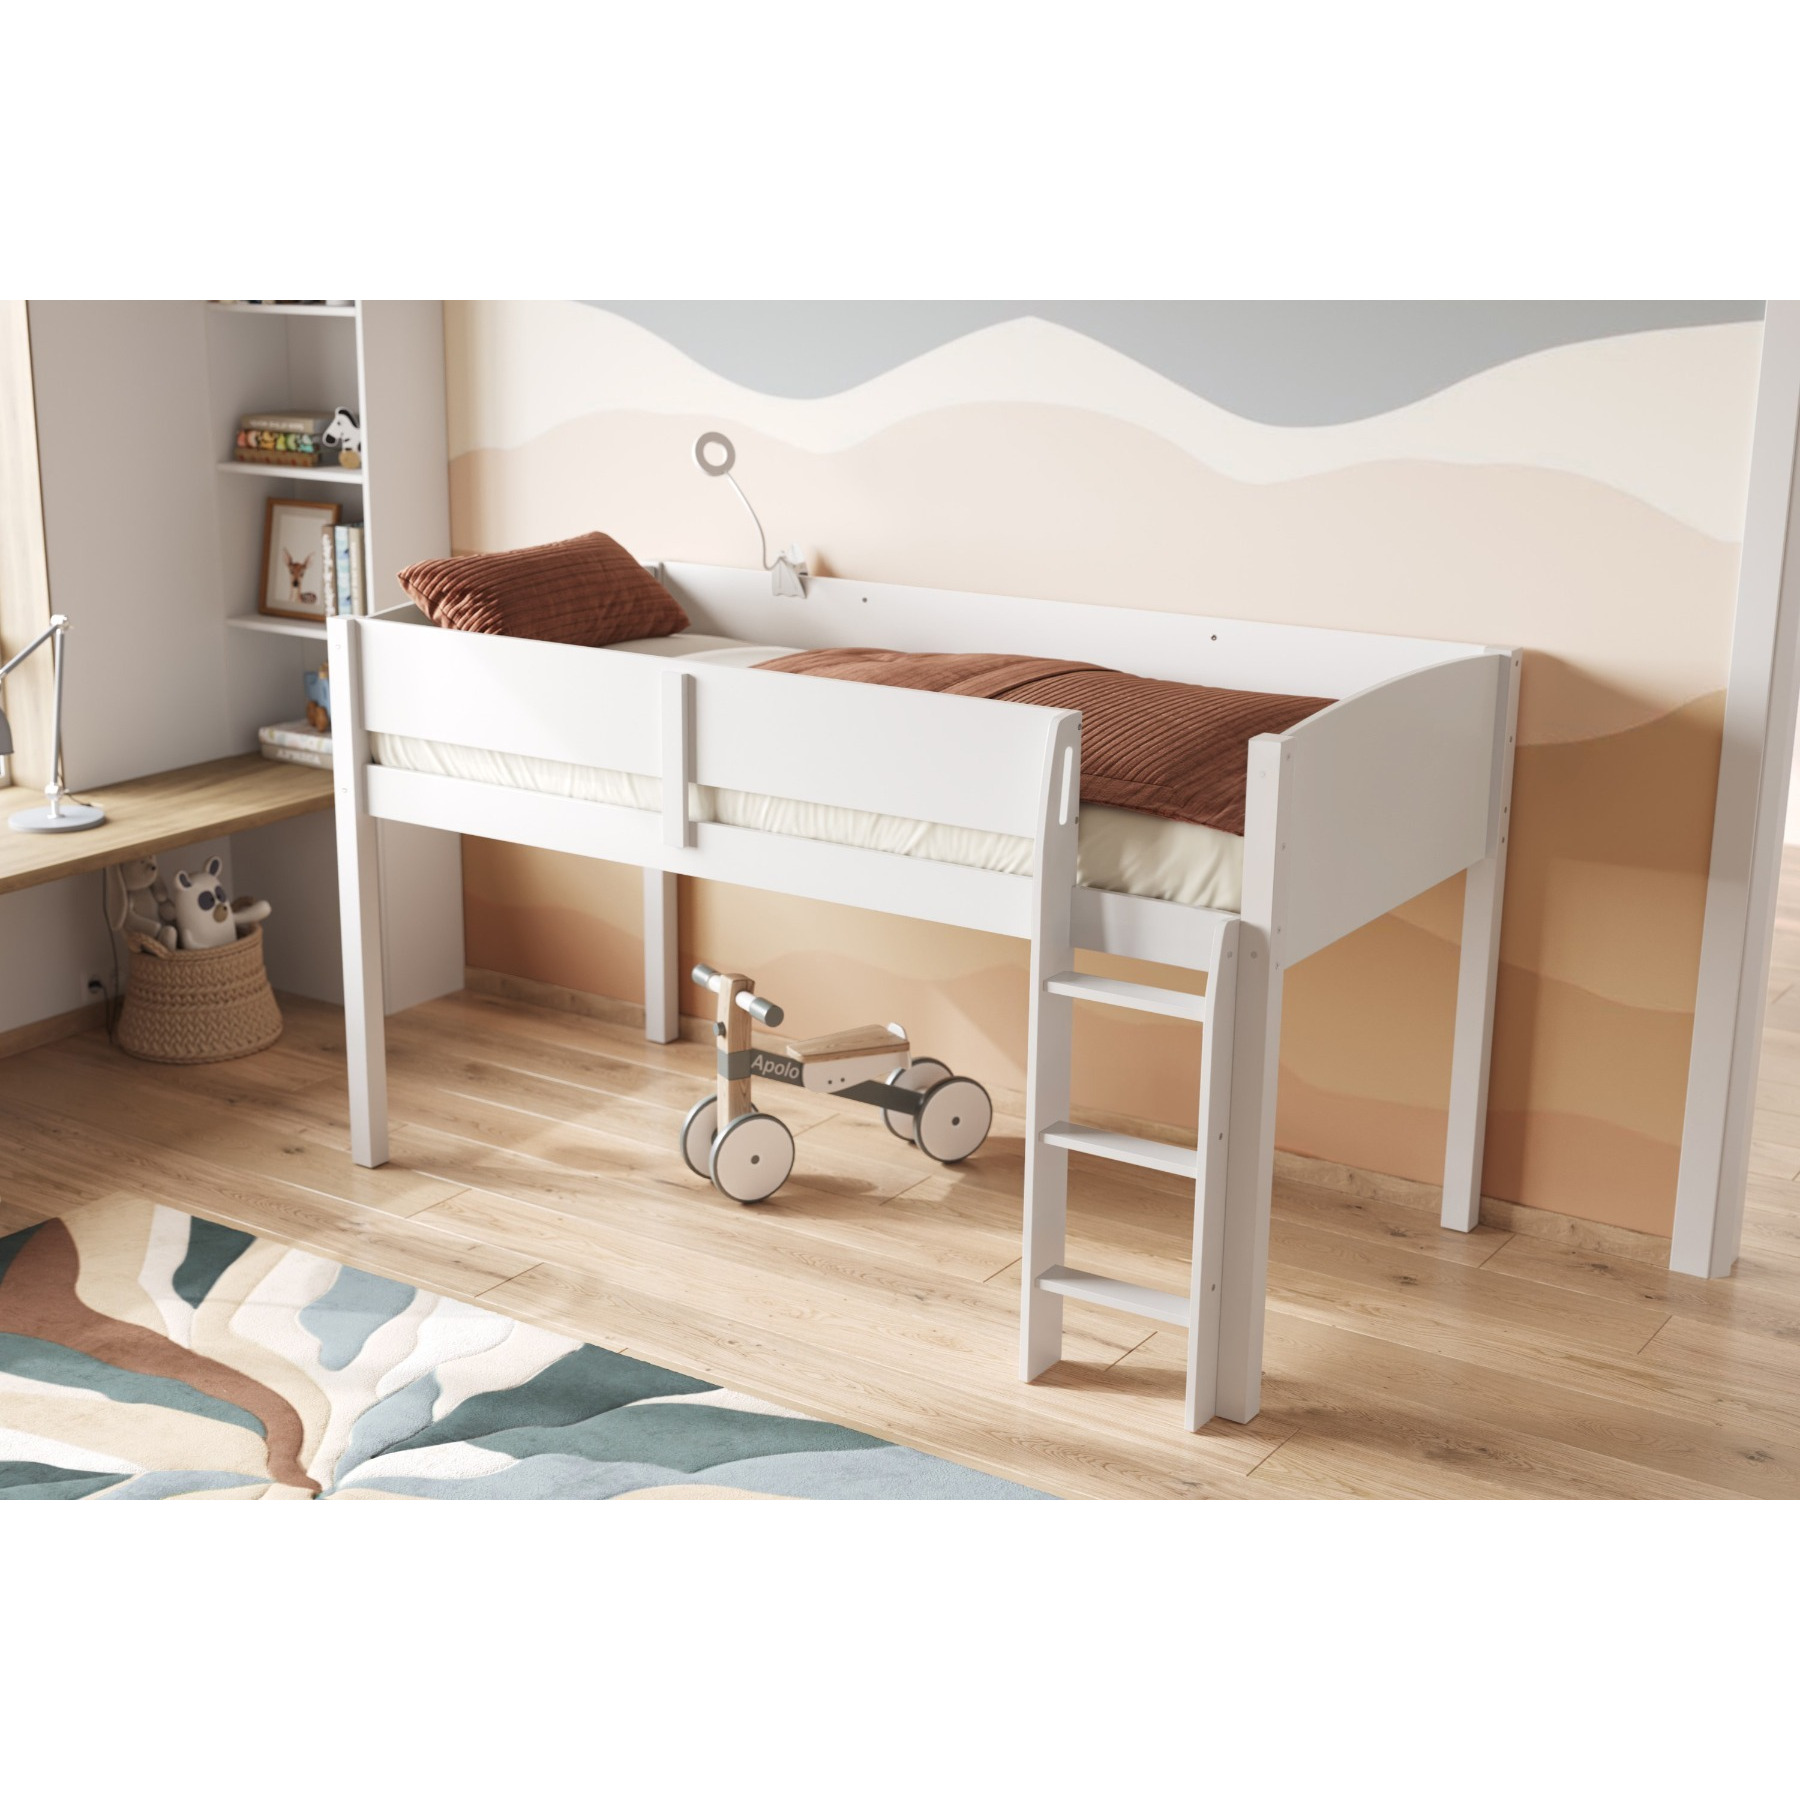 Flair Loop Wooden Mid Sleeper Cabin Bed White - image 1